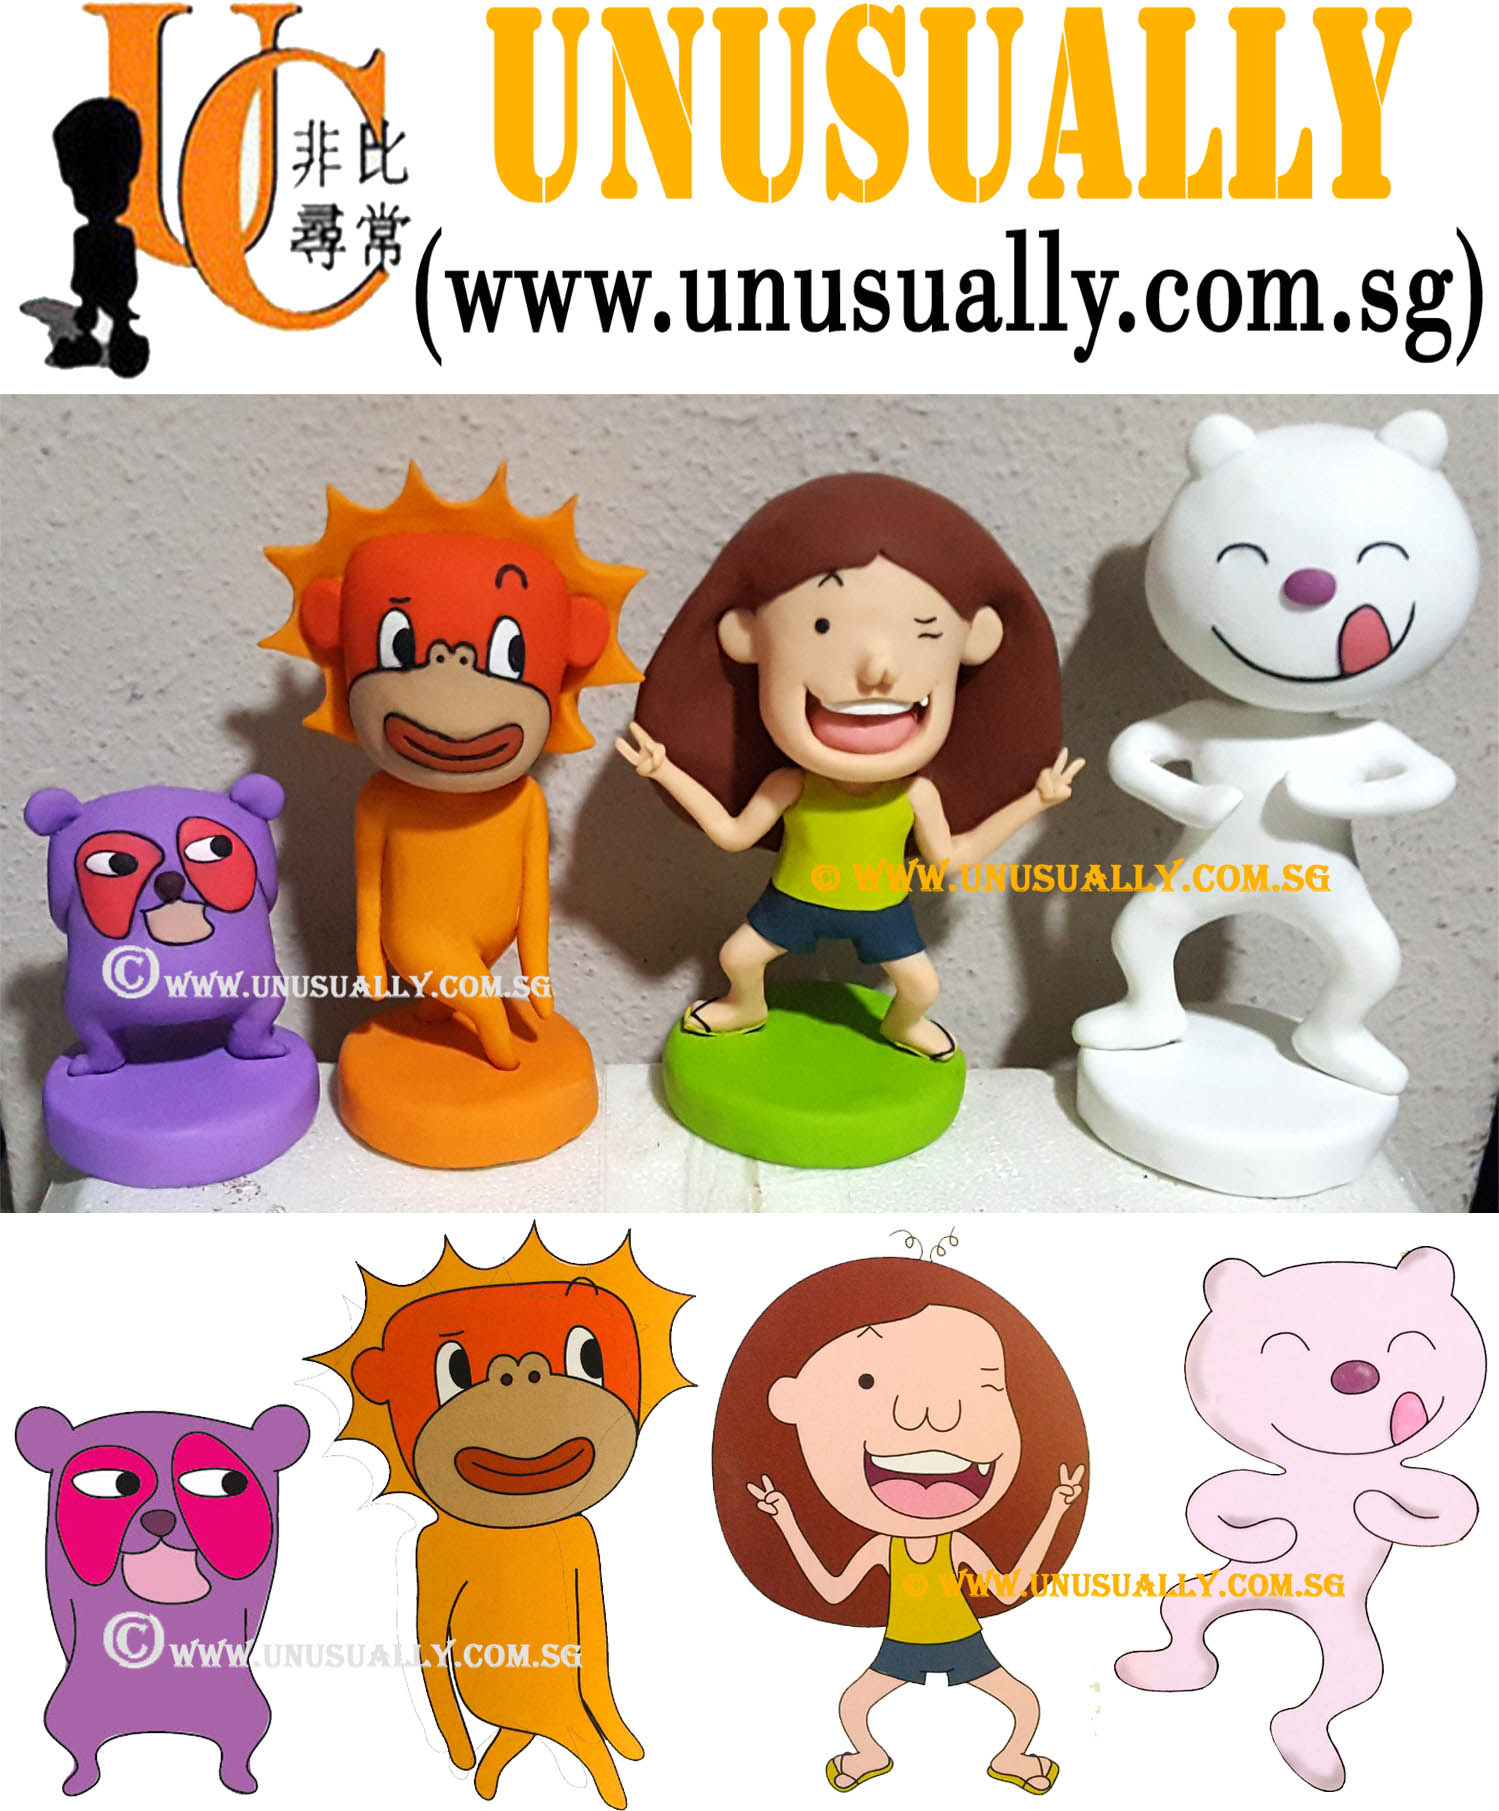 Fully Customized 3D Chinese Novel Character Figurines